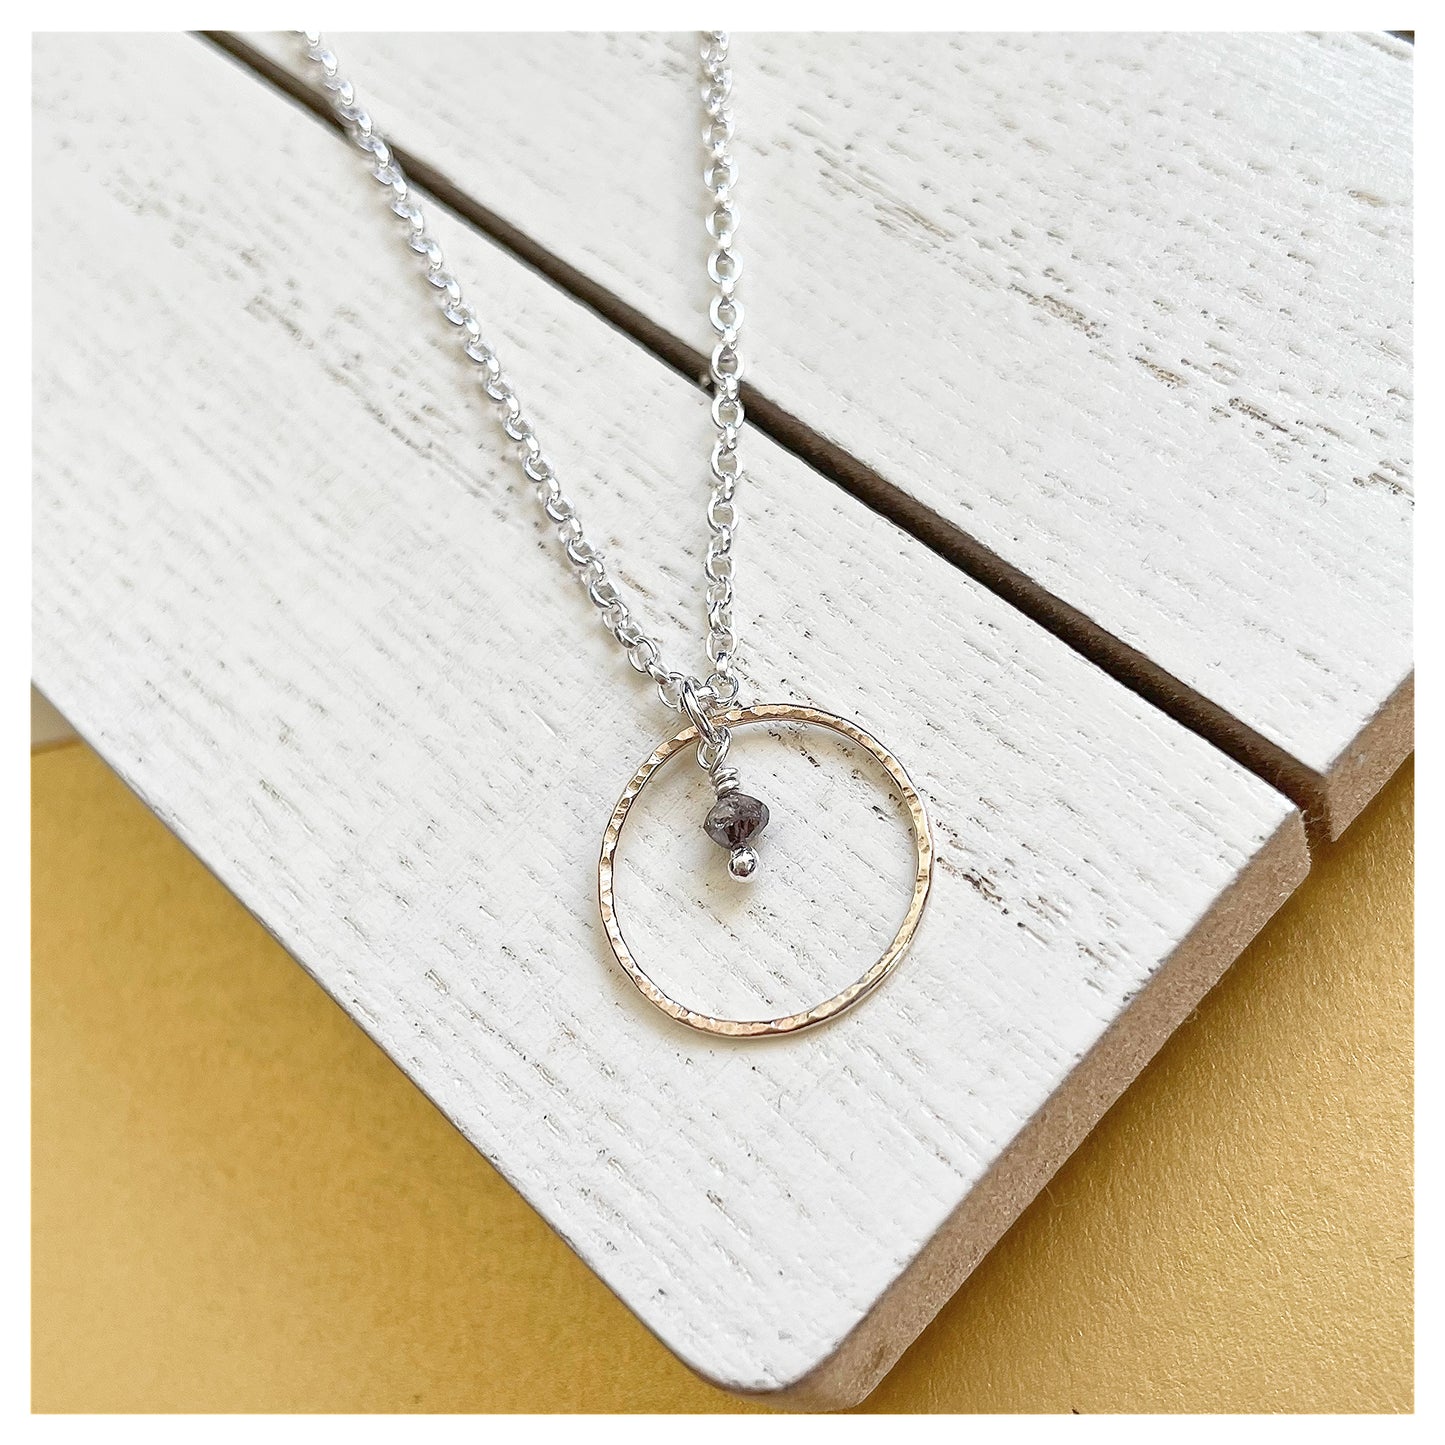 Mini 9ct Yellow Gold Hammered circle, Sterling Silver and Dark Grey Diamond Bead Necklace.